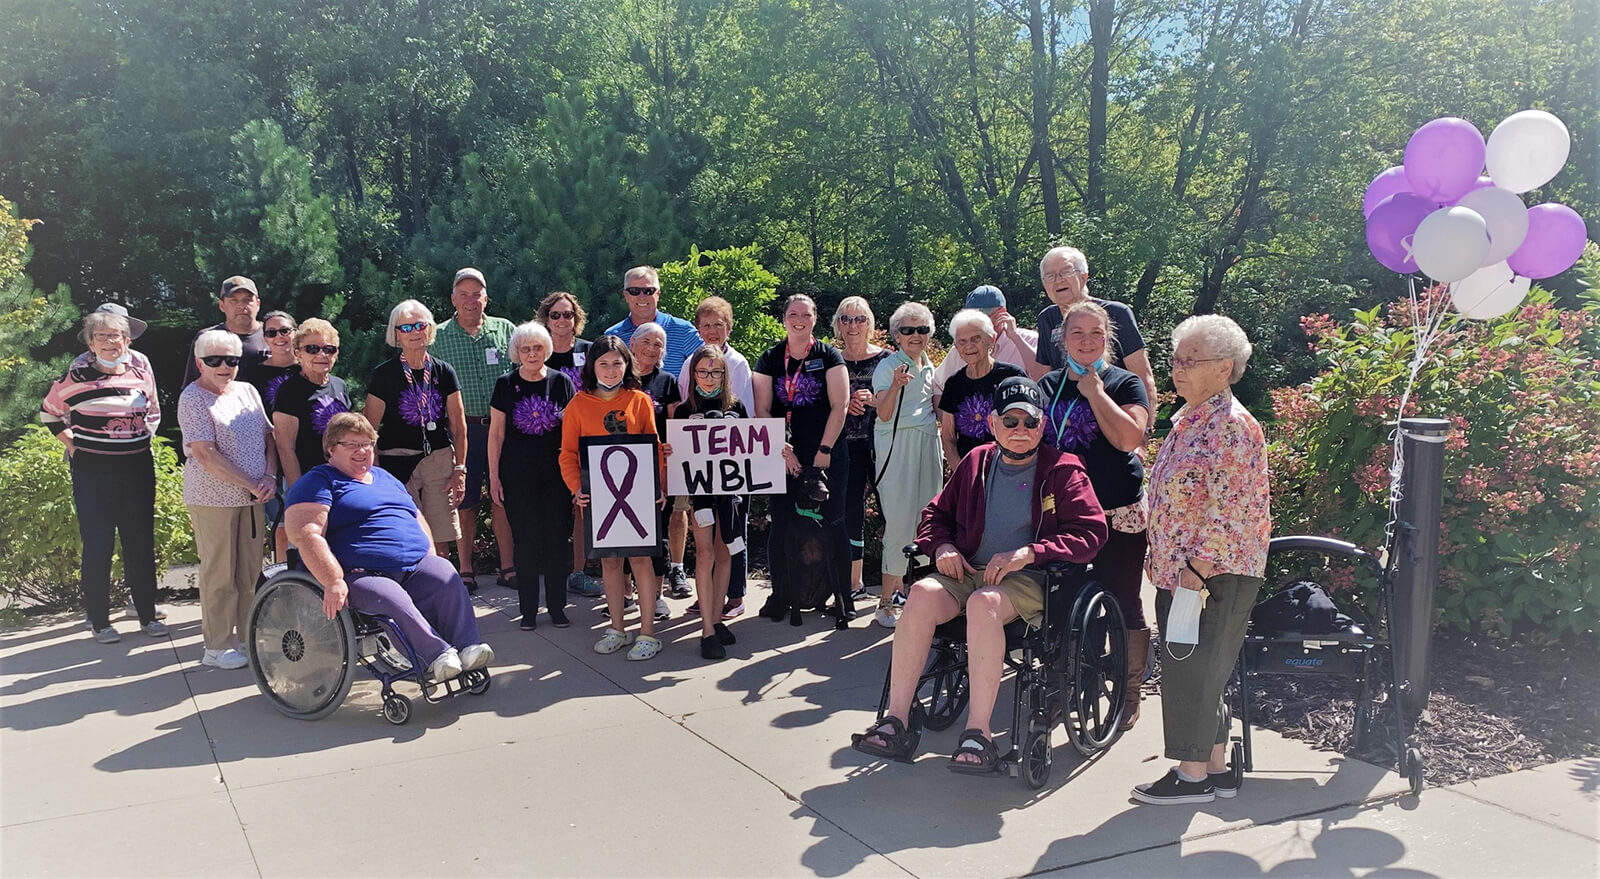 Residents of The Waters of White Bear Lake participating in a community walk for charity, showing team spirit and engagement.